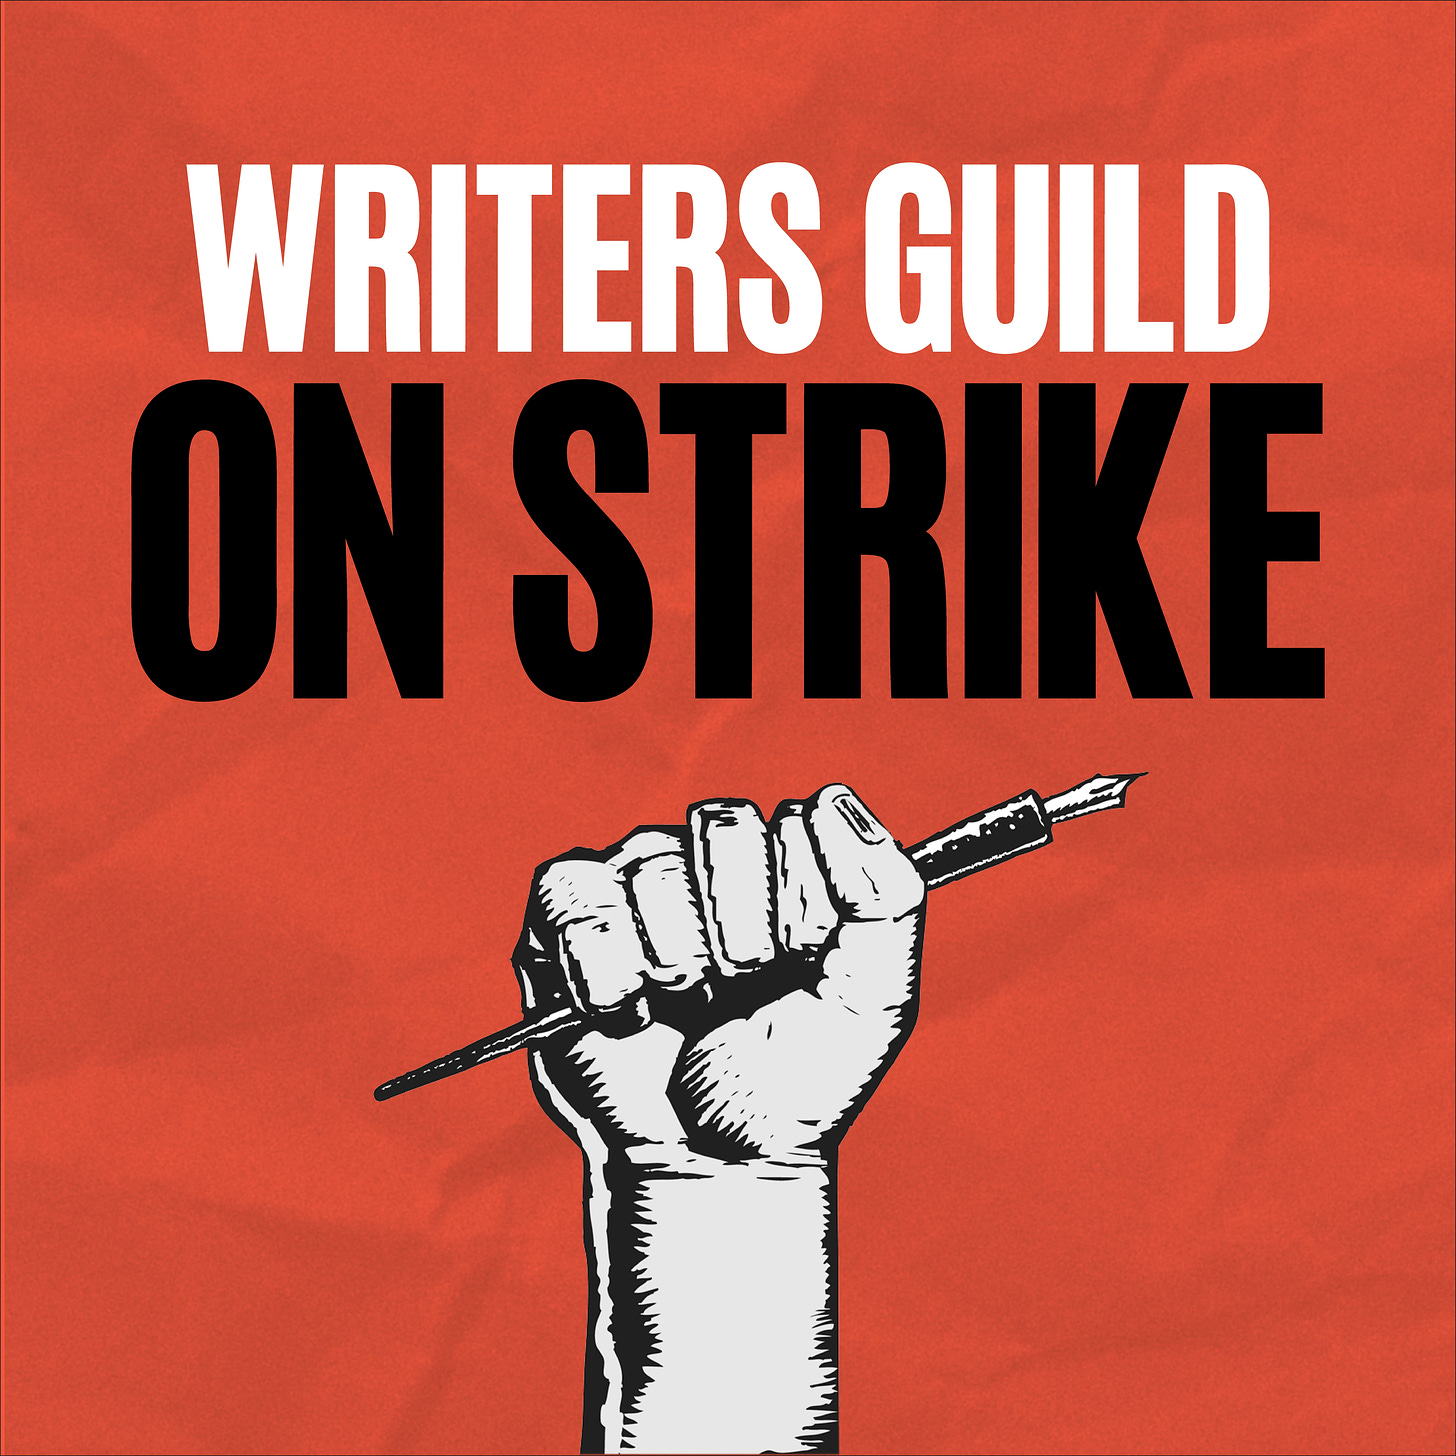 Writers Guild On Strike image with orange background and a fist clutching a pen.